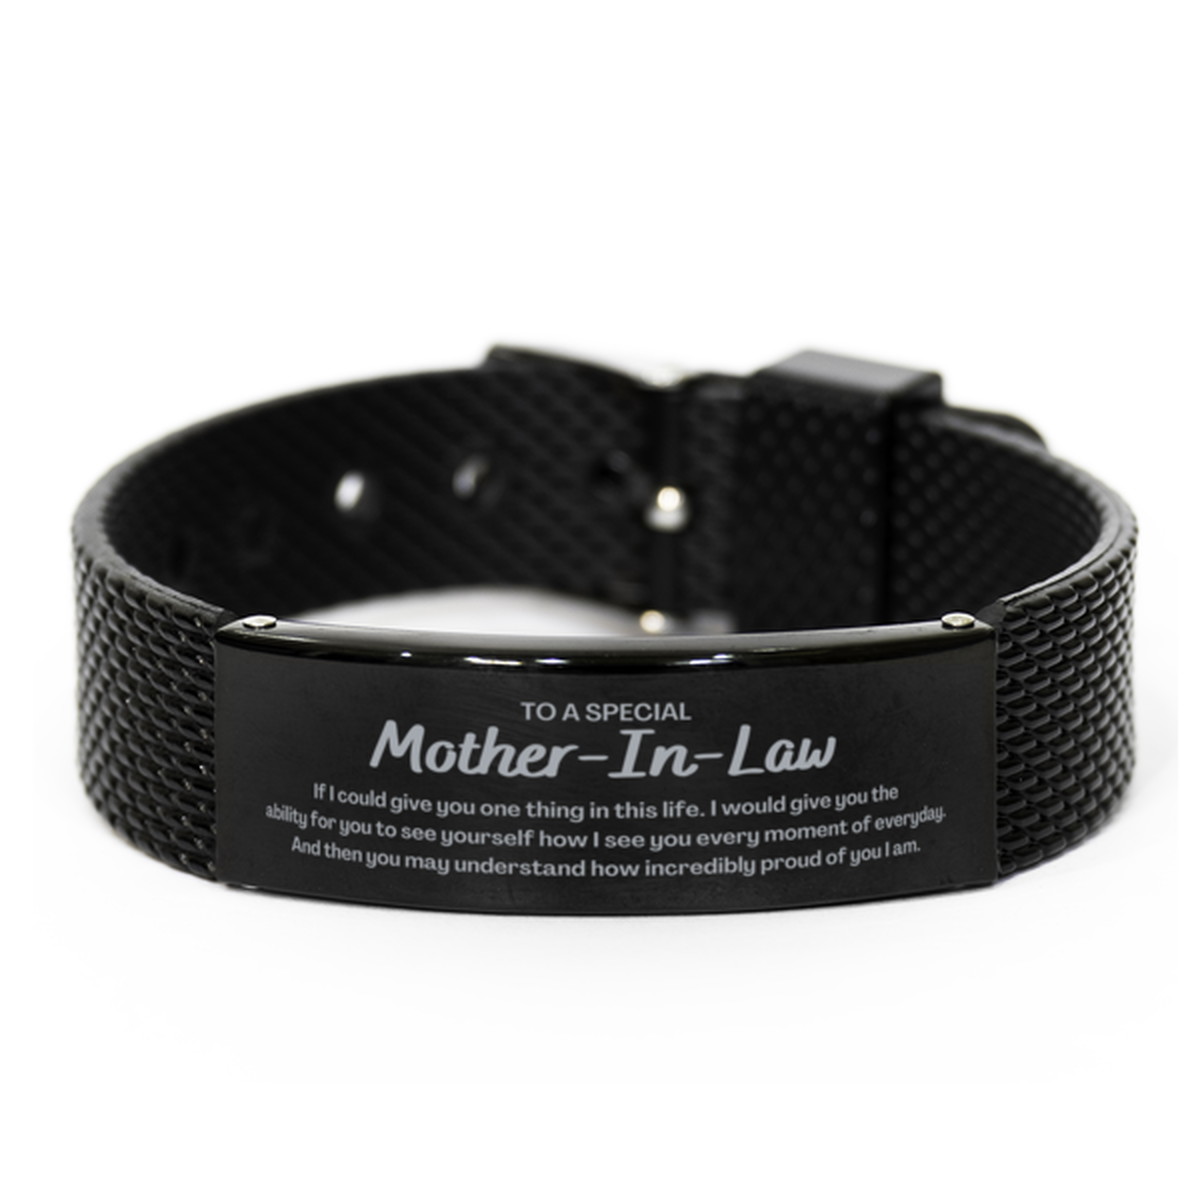 To My Mother-In-Law Black Shark Mesh Bracelet, Gifts For Mother-In-Law Engraved, Inspirational Gifts for Christmas Birthday, Epic Gifts for Mother-In-Law To A Special Mother-In-Law how incredibly proud of you I am